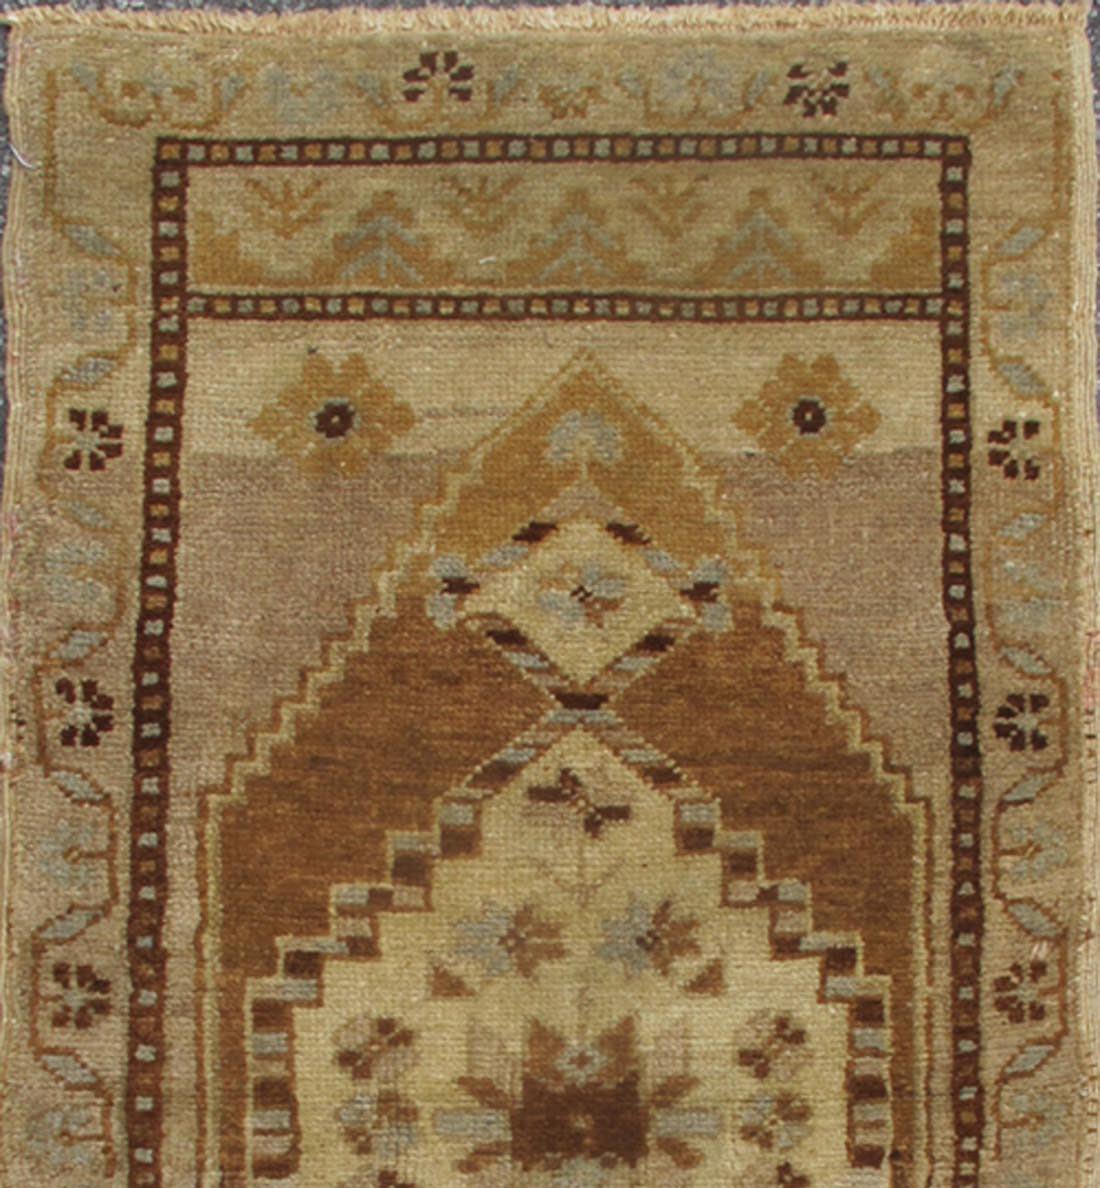 20th Century Small Turkish Oushak Carpet with Central Medallion in Light Brown, Taupe & Gray